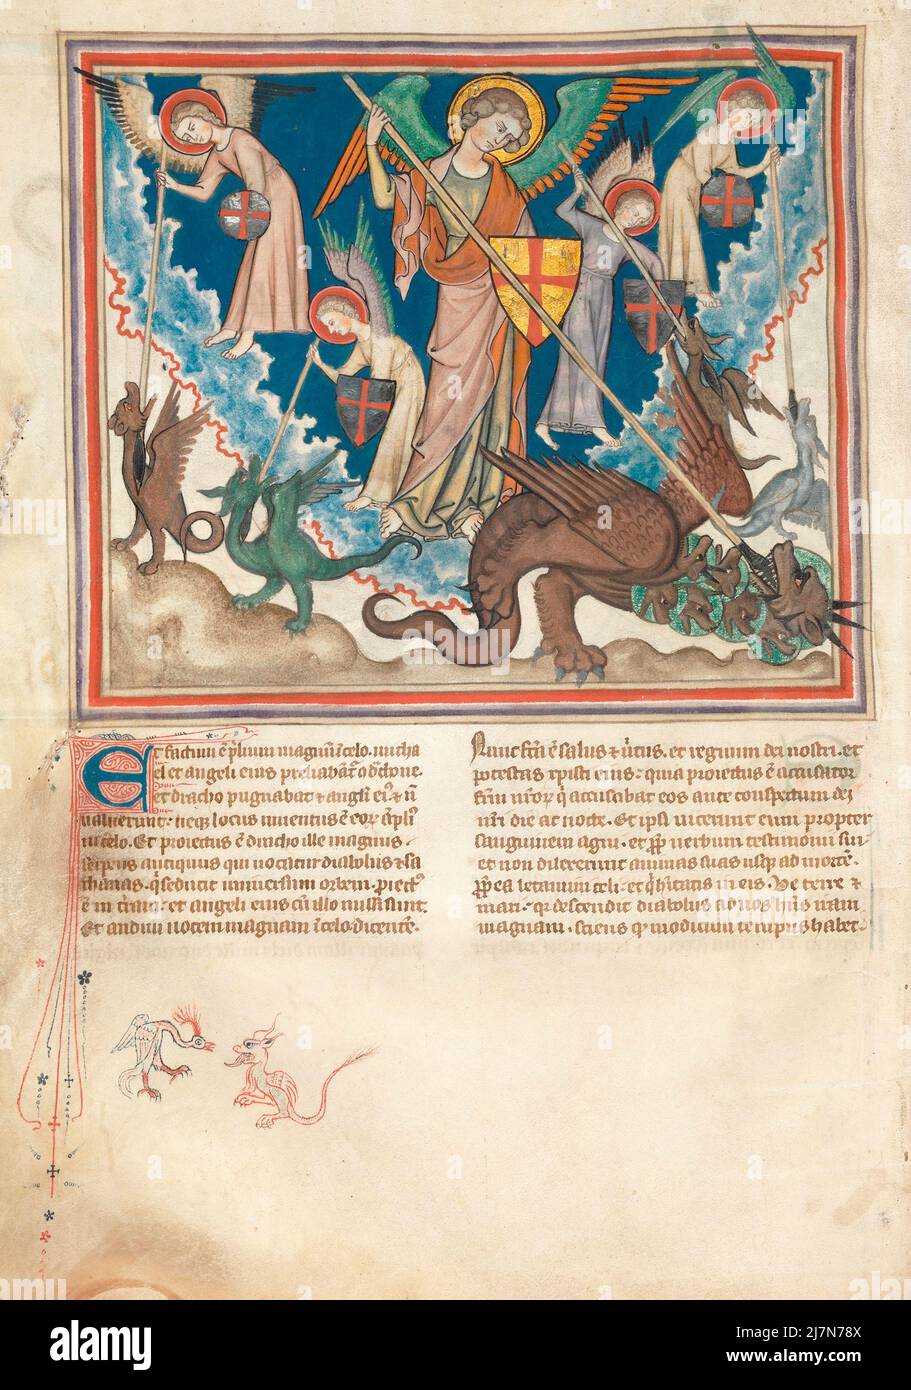 The Cloisters Apocalypse ca. 1330  - The Apocalypse, or Book of Revelation,  John the Evangelist , giovanni evangelista, during his exile on the Greek island of Patmos. In this Image the War in Heaven Stock Photo